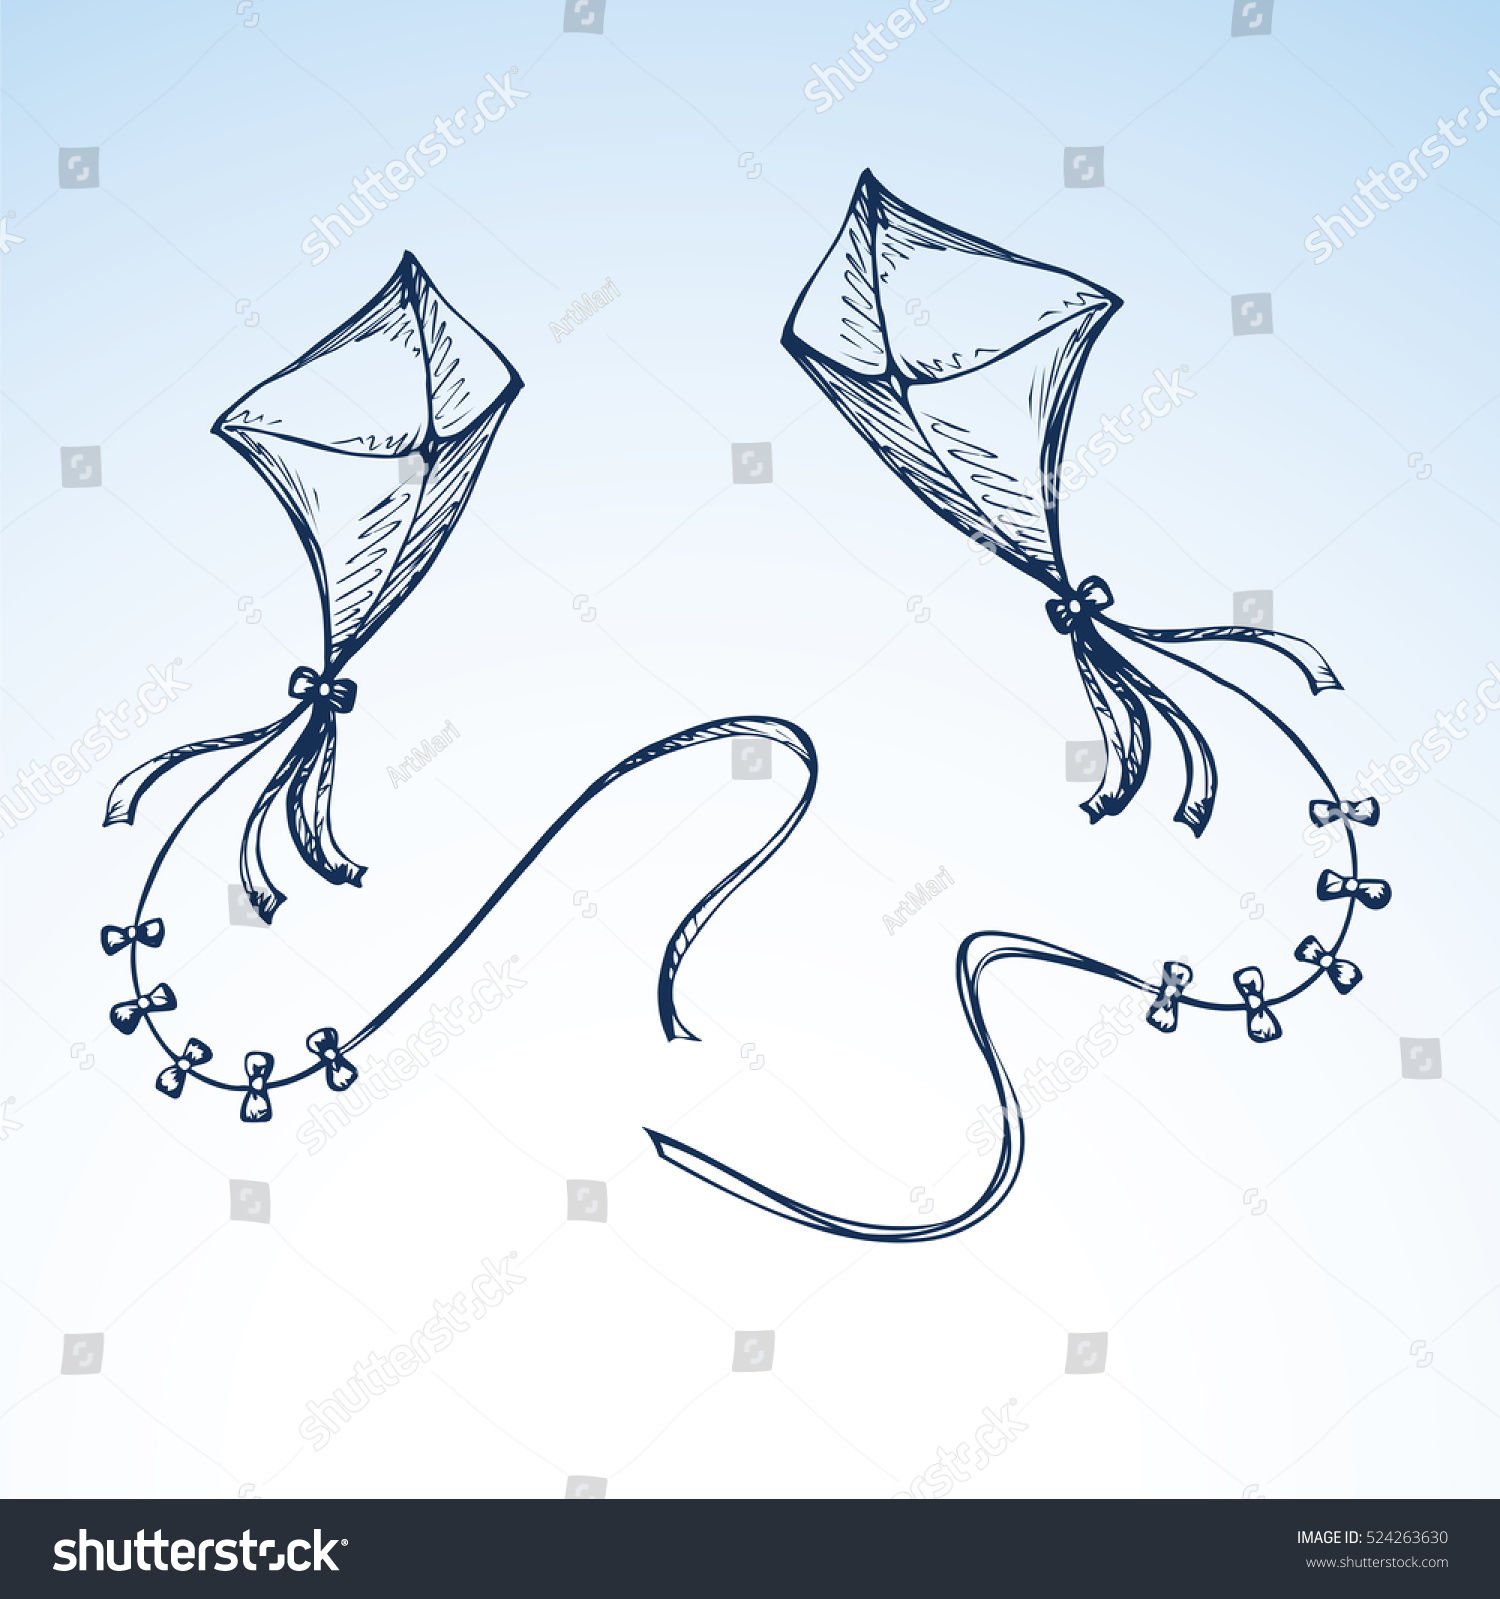 SVG of Cute kid tethered bow wing isolated on white backdrop. Freehand outline ink hand drawn picture sign sketchy in art retro scribble style pen on paper. Closeup view with space for text on heaven svg